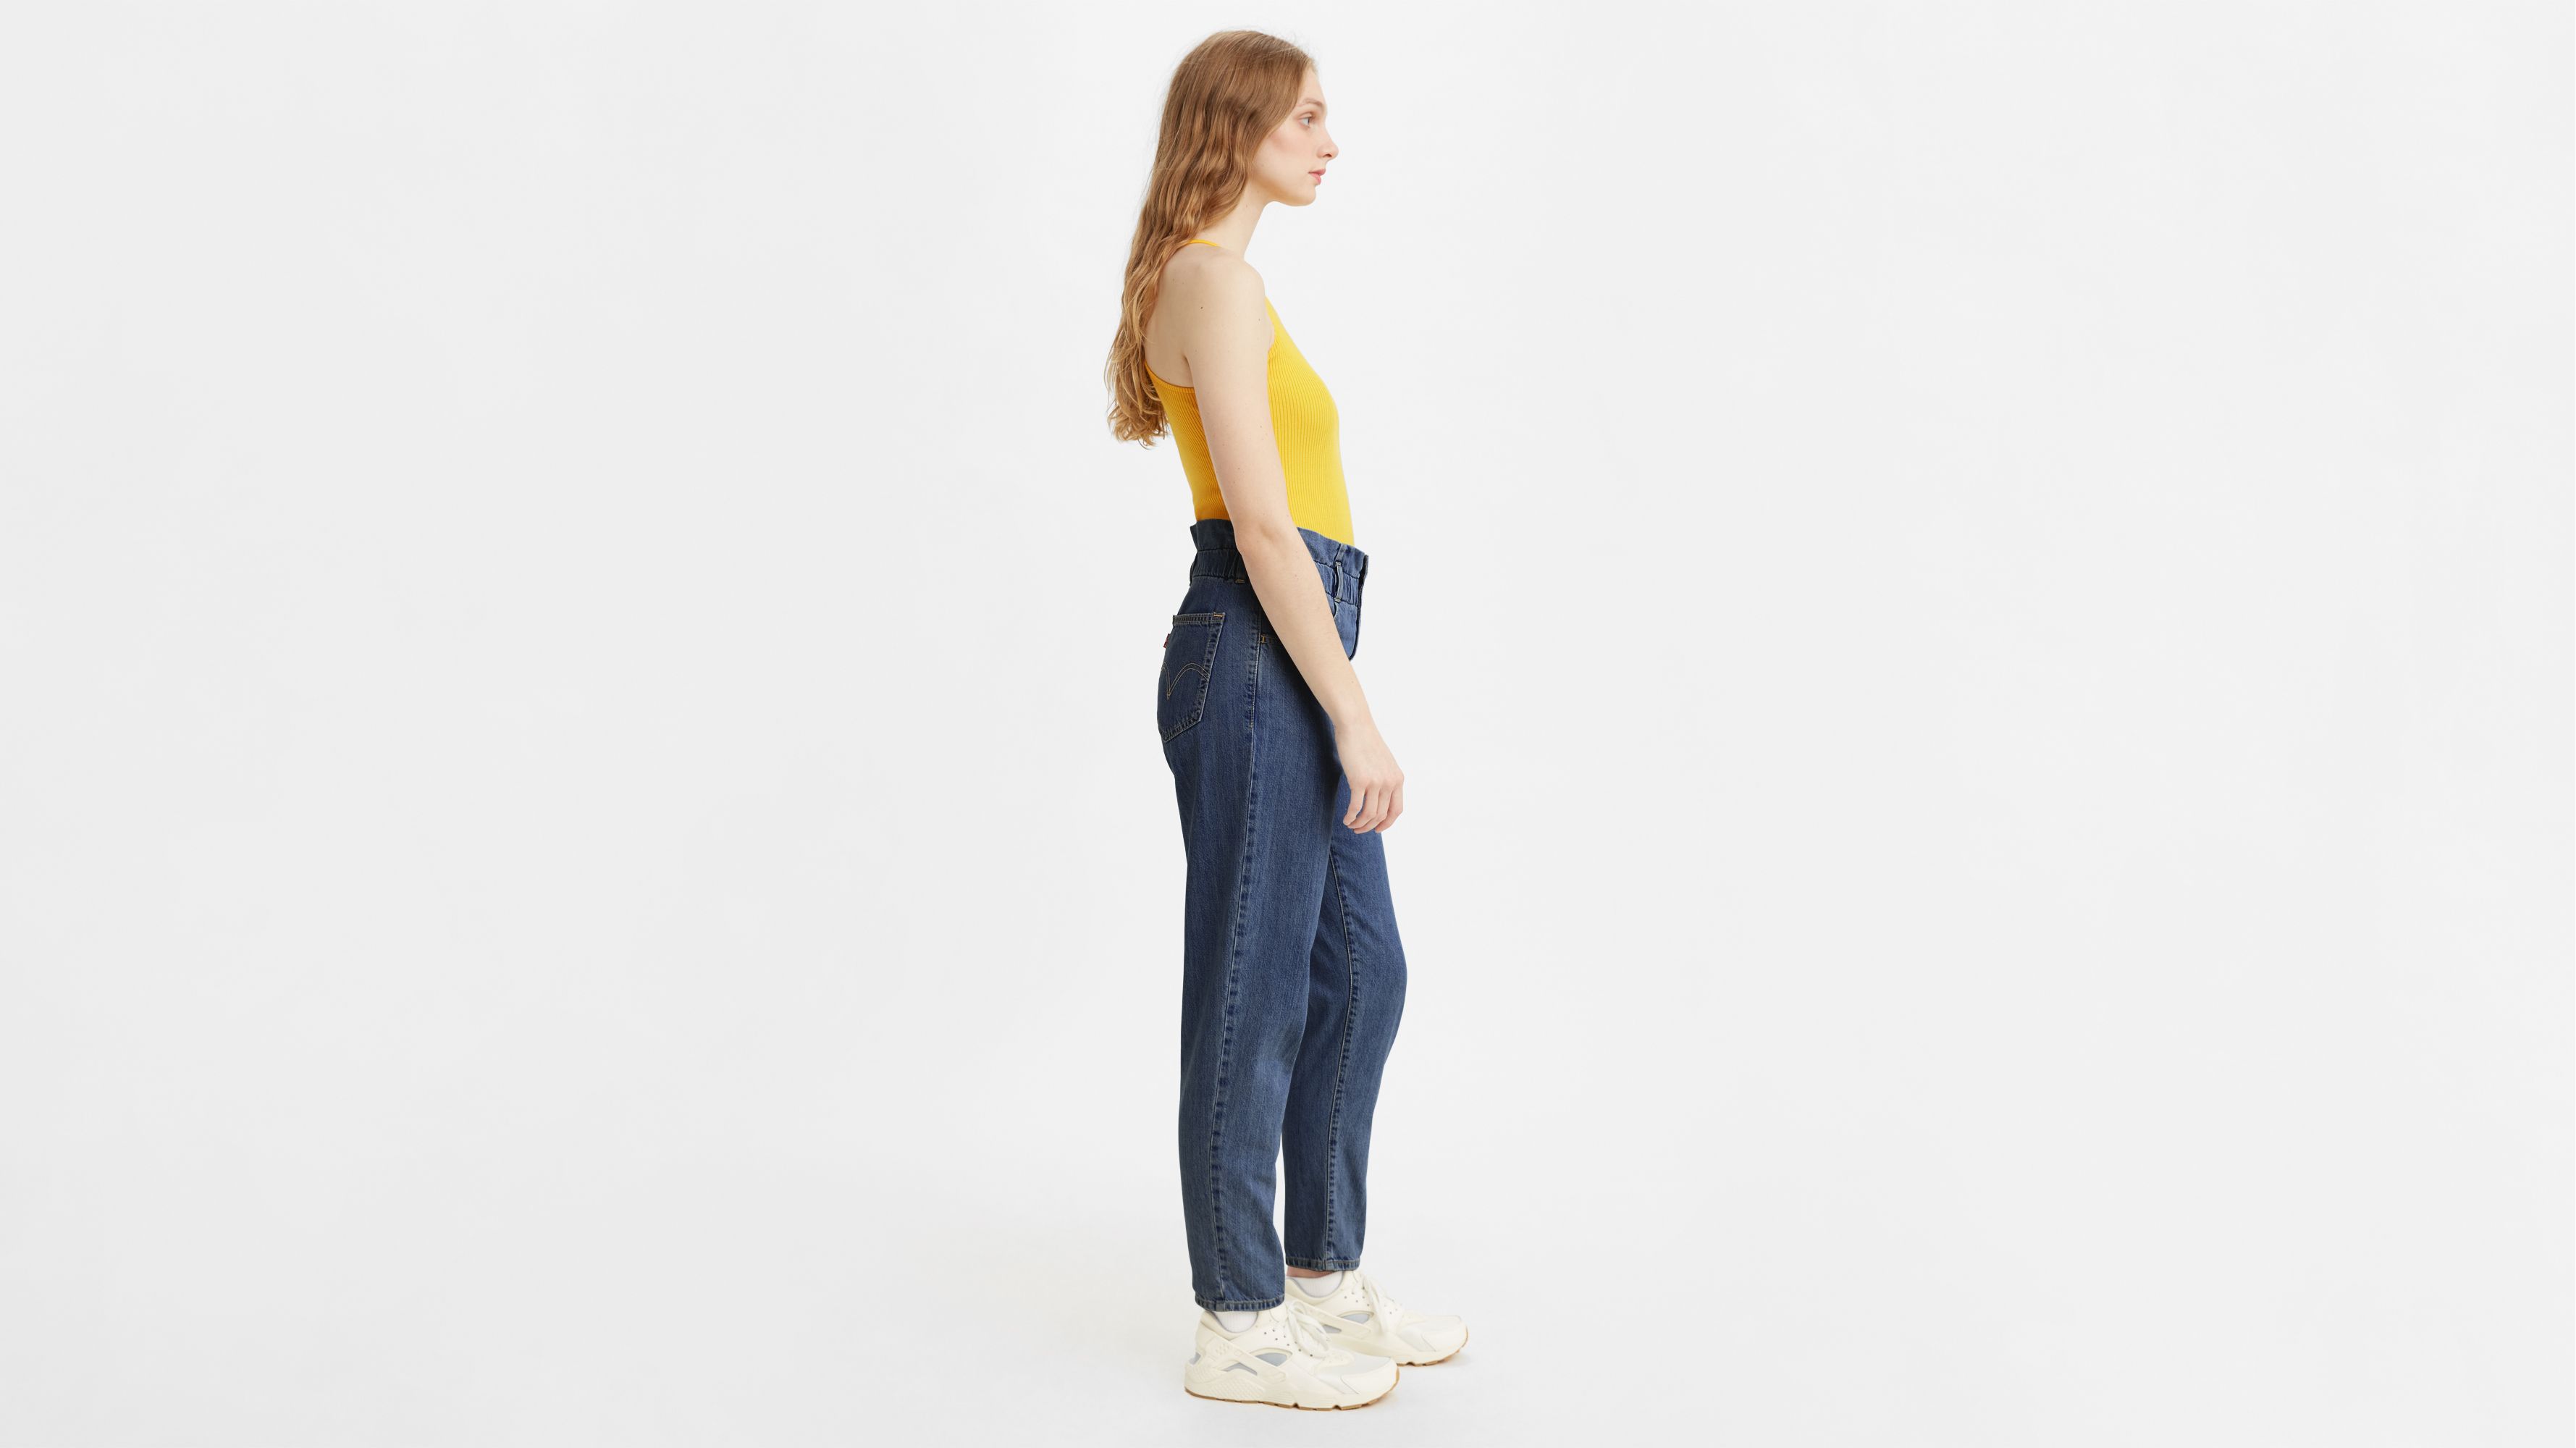 tapered paperbag pants